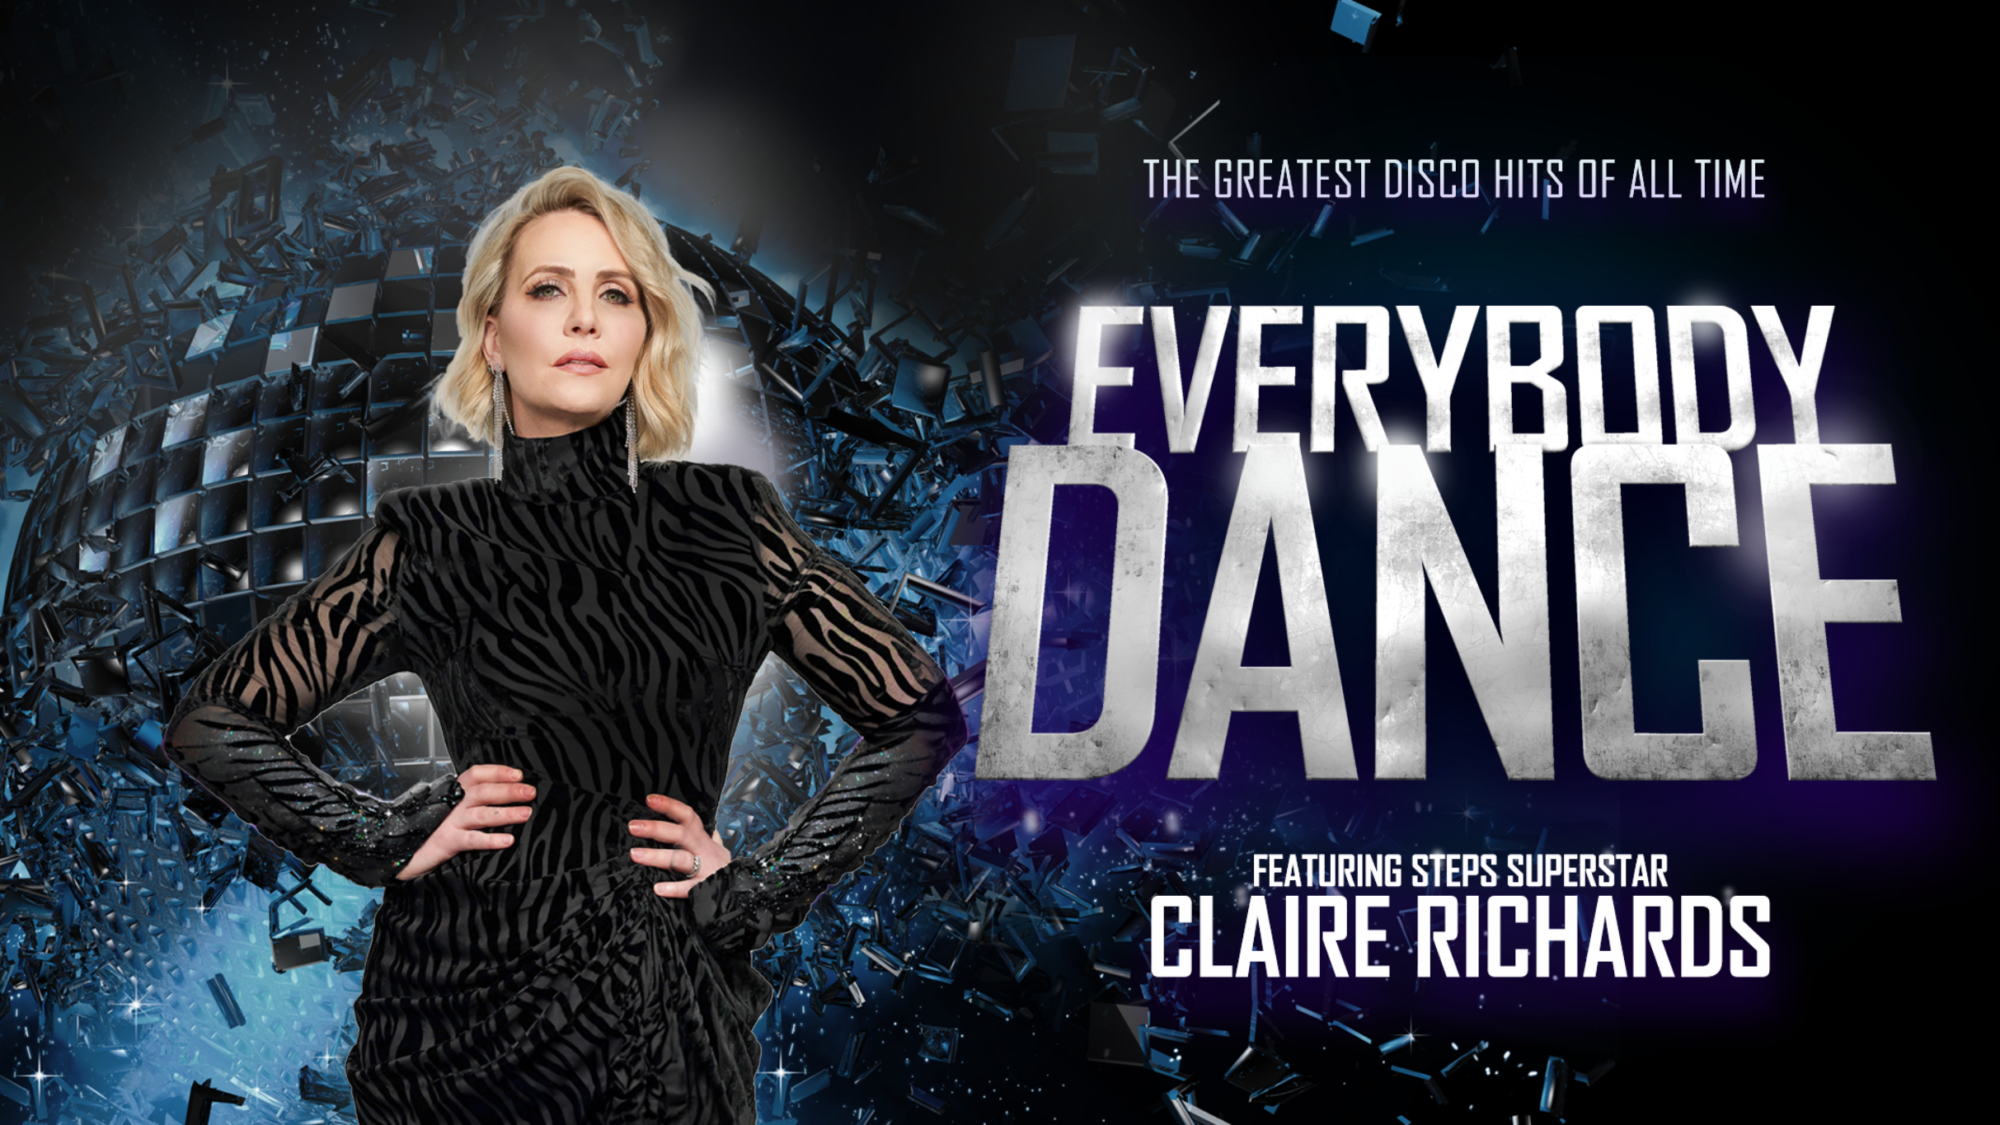 Image name Everybody Dance with Claire Richards at Hull City Hall Hull the 17 image from the post Everybody Dance with Claire Richards at Leeds Grand Theatre, Leeds in Yorkshire.com.